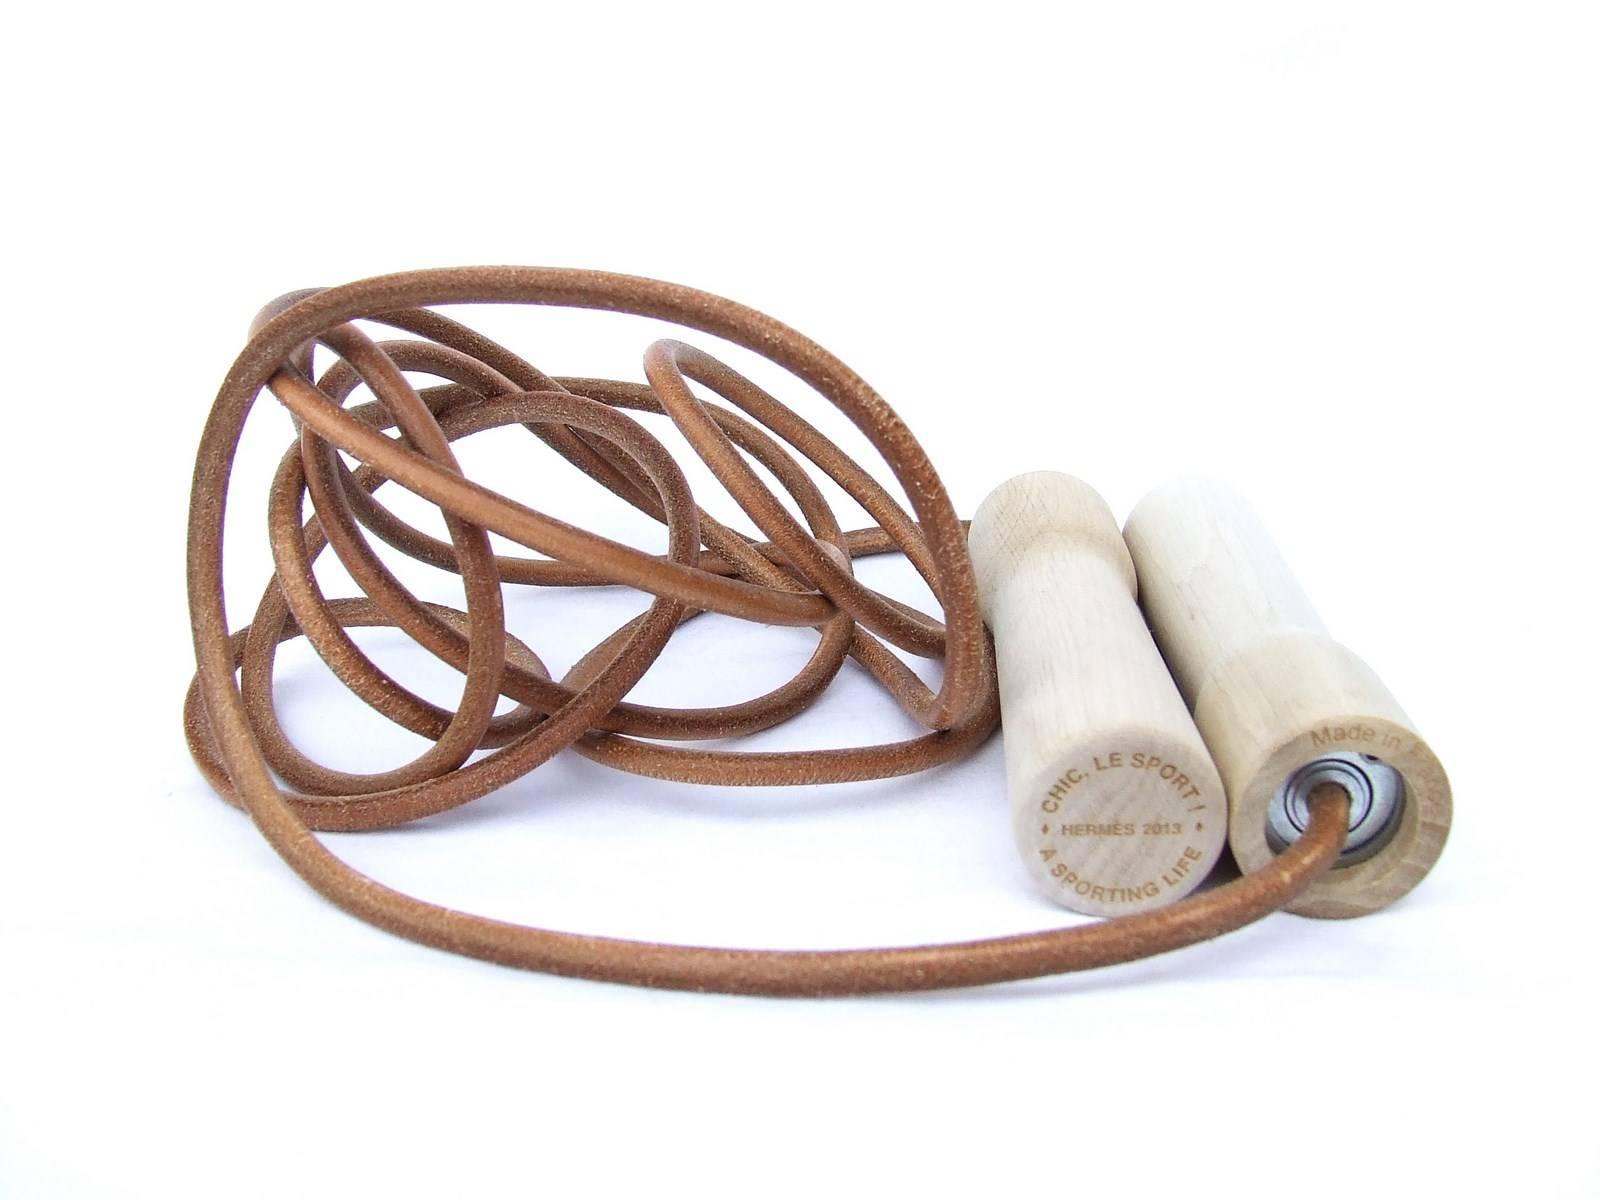 Rare Hermes Jumping Rope In Leather and Wood Limited Edition Never Used 1